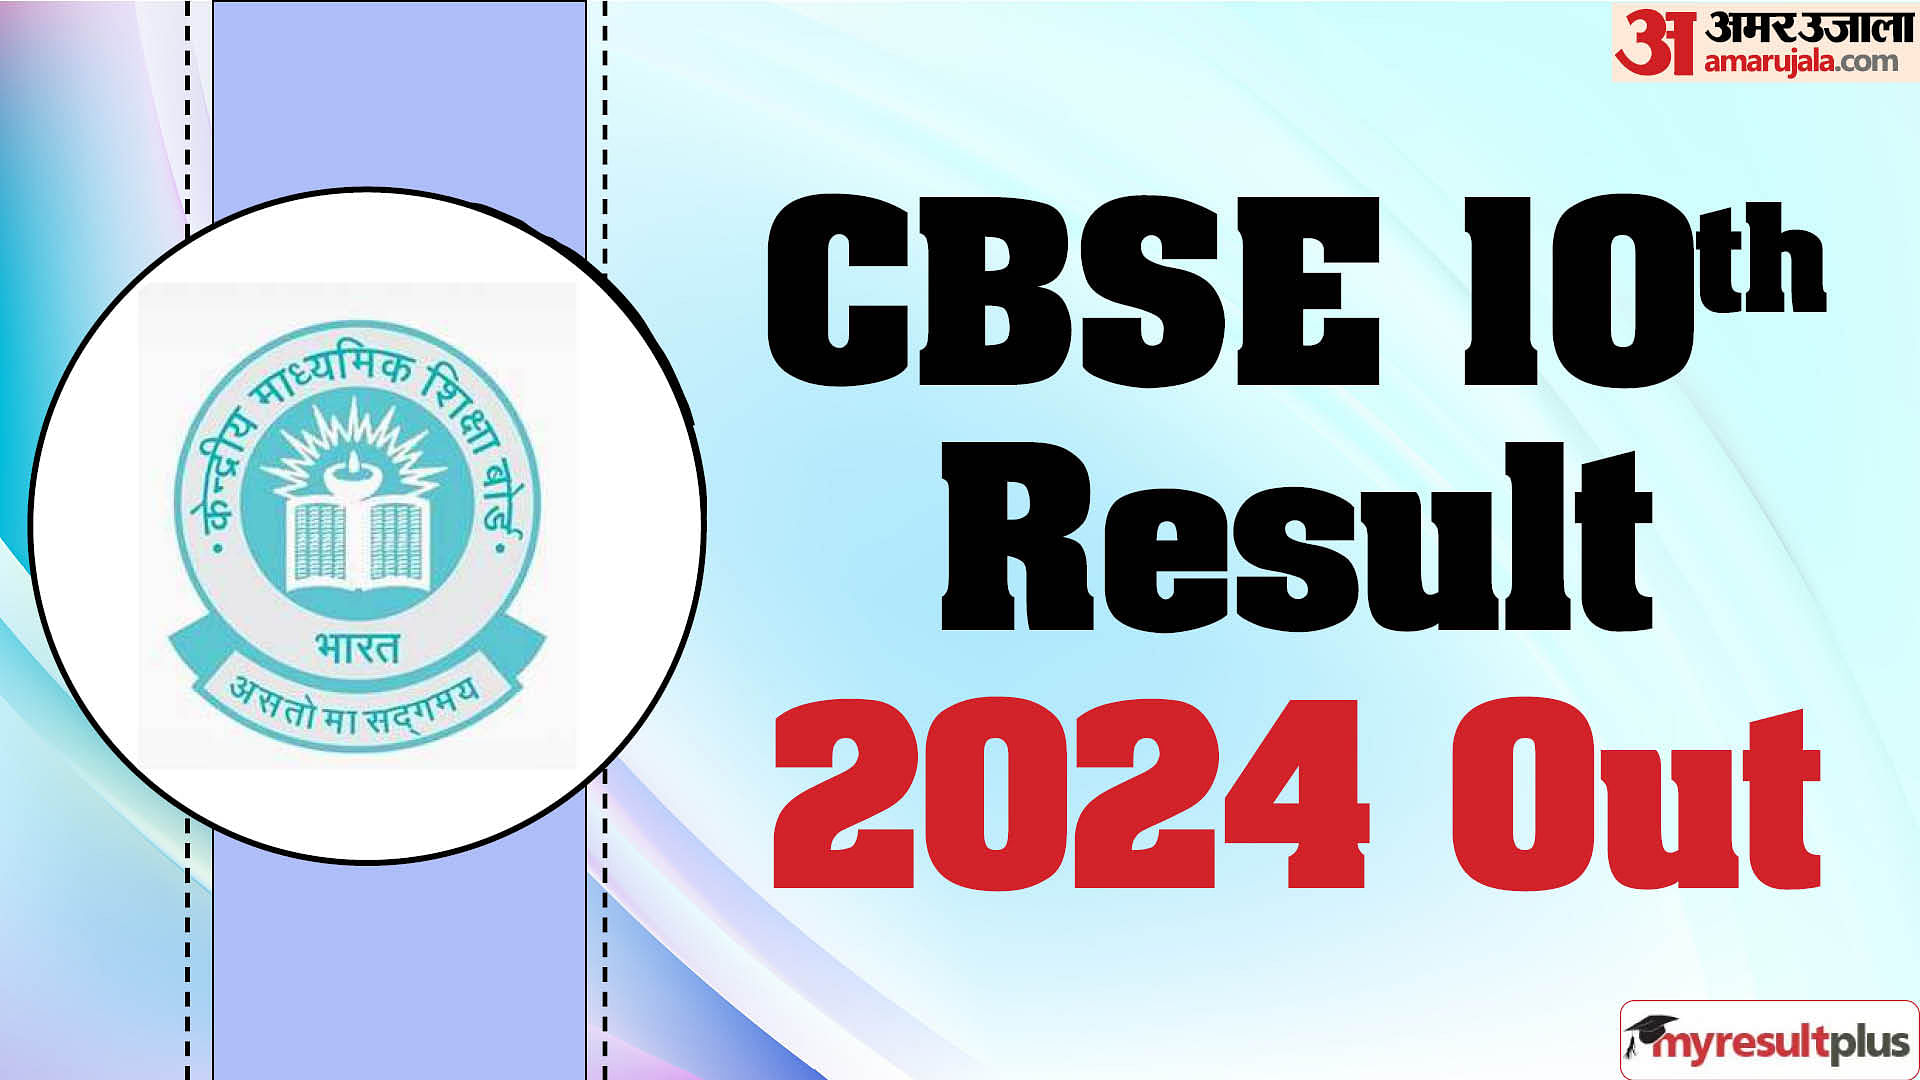 CBSE Class 10th Result Out now, Check overall pass percentage and how to download here